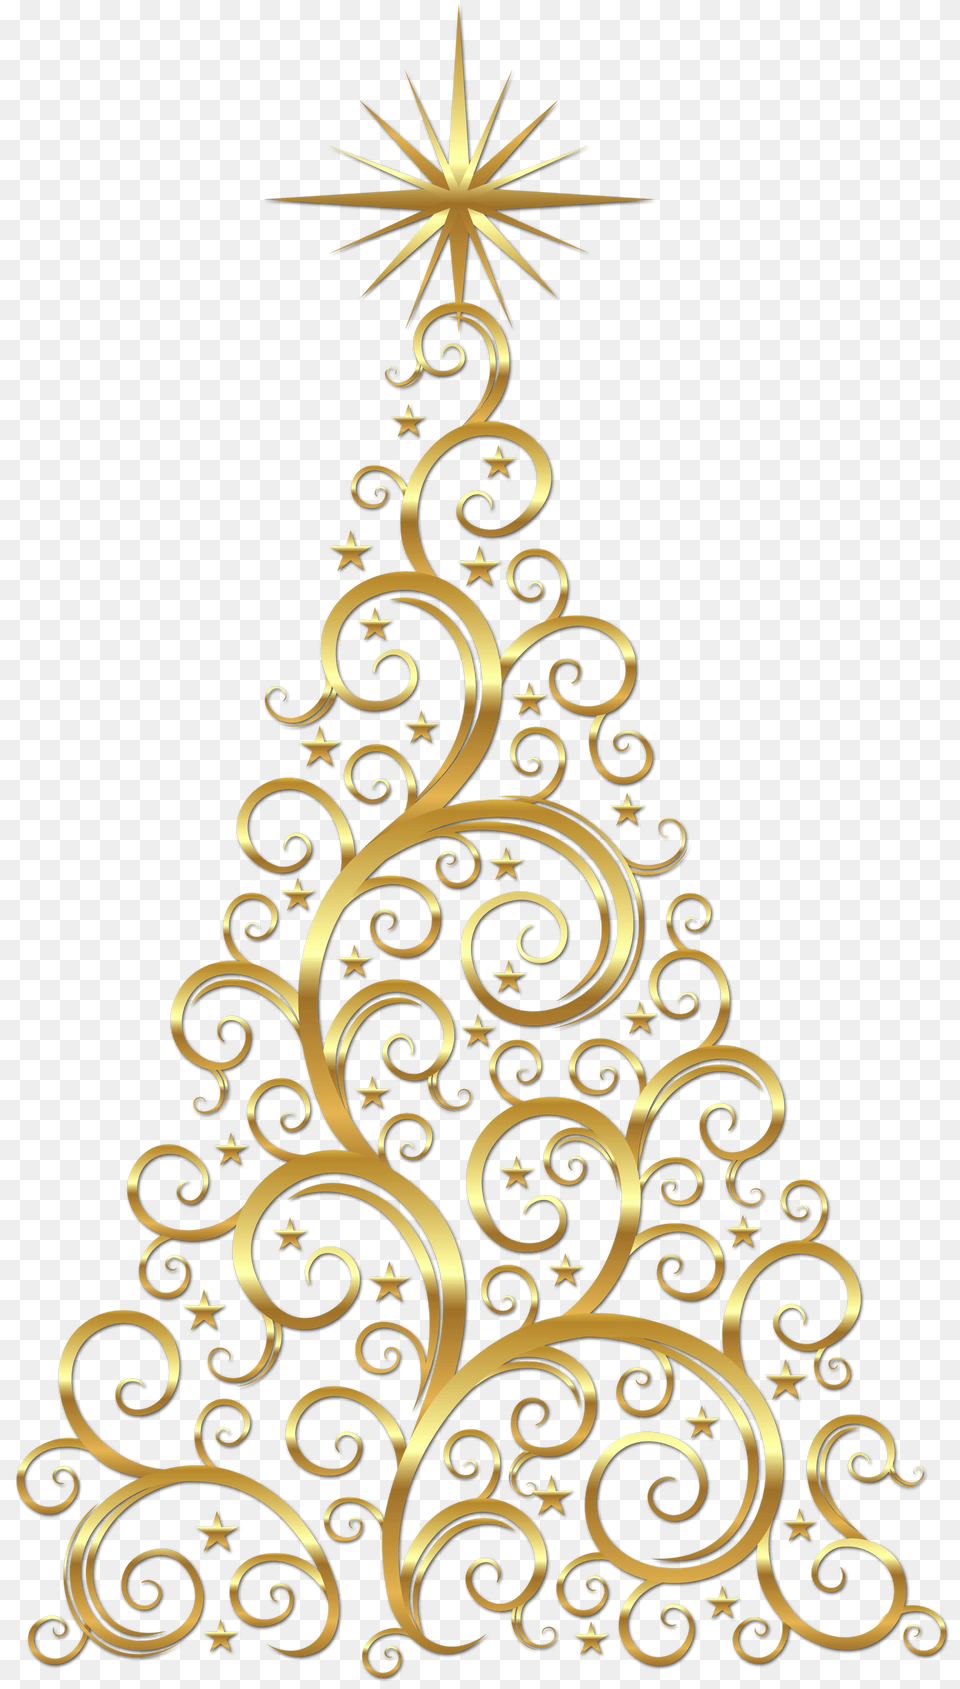 Gold Deco Christmas Tree Clipart Gold Christmas Tree Clipart, Christmas Decorations, Festival, Architecture, Building Png